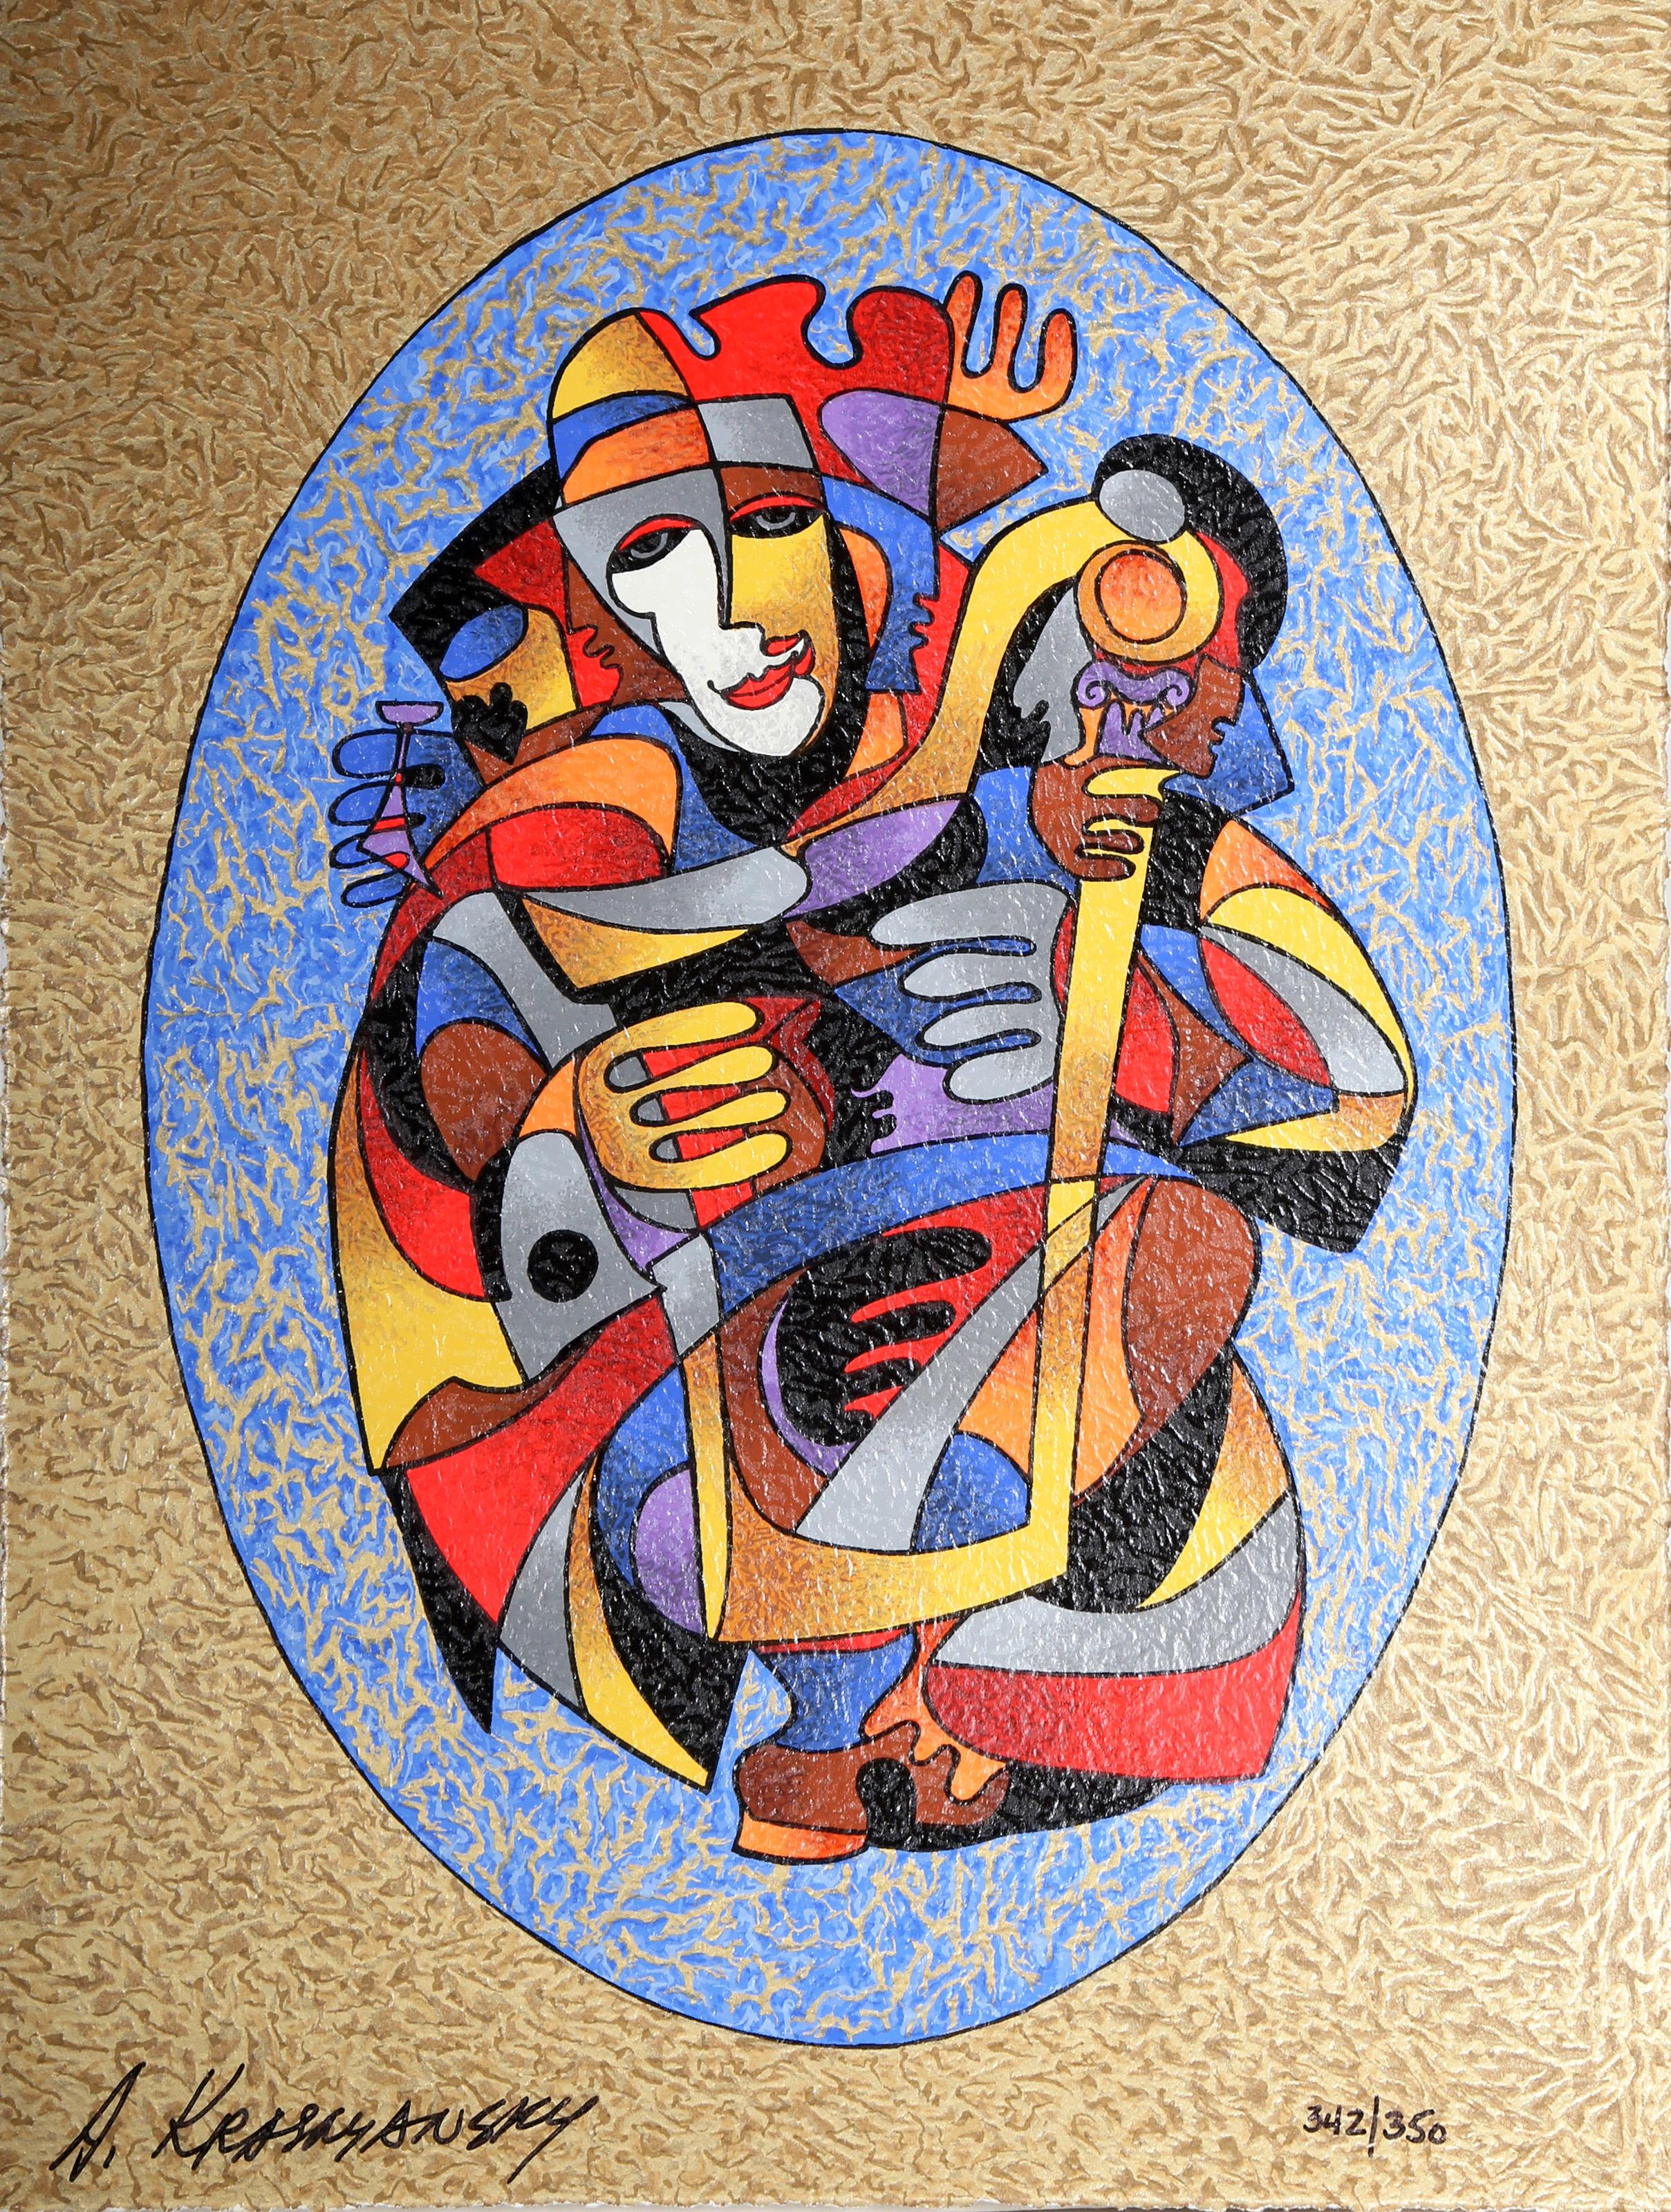  Anatole Krasnyansky, Ukrainian/American (1930 - ) - Musicians, Medium: Screenprint, signed and numbered in marker, Edition: 342/350, Size: 14 x 10.75 in. (35.56 x 27.31 cm), Description: A playful screenprint by Anatole Krasnyansky in a dynamic